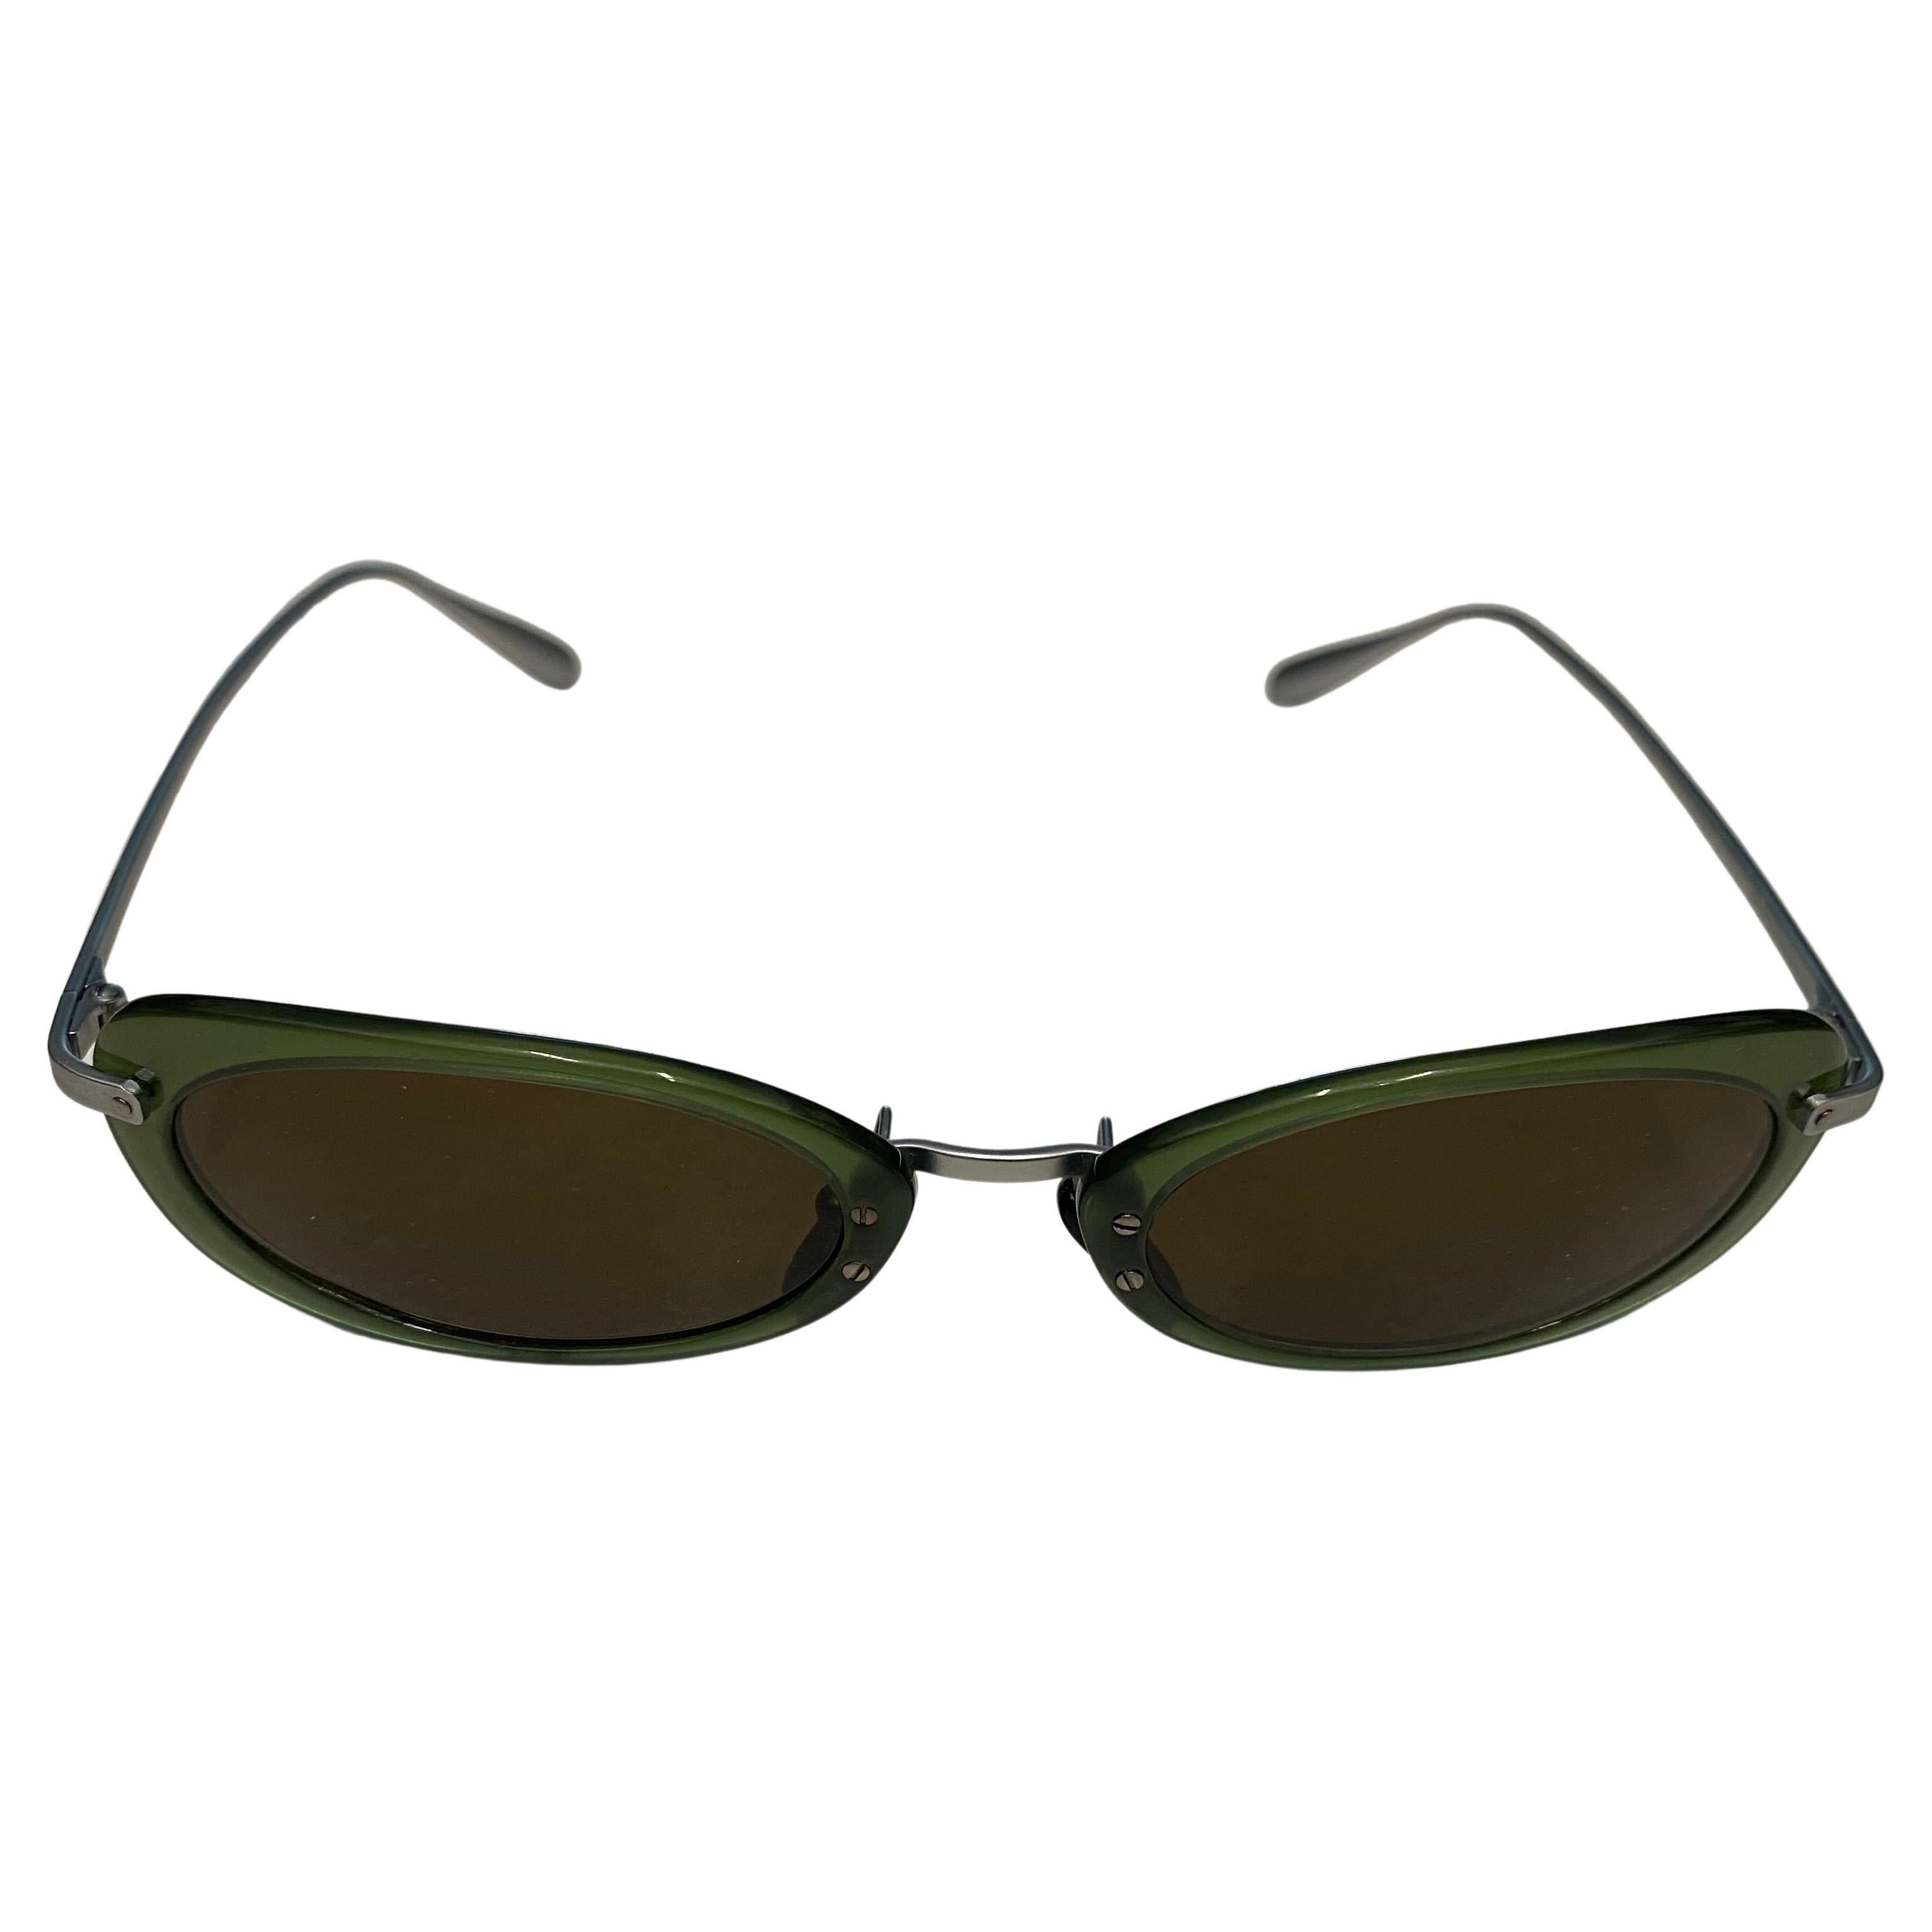 A pair of sunglasses designed and manufactured in Italy by Nina Ricci, they are in very good conditions.